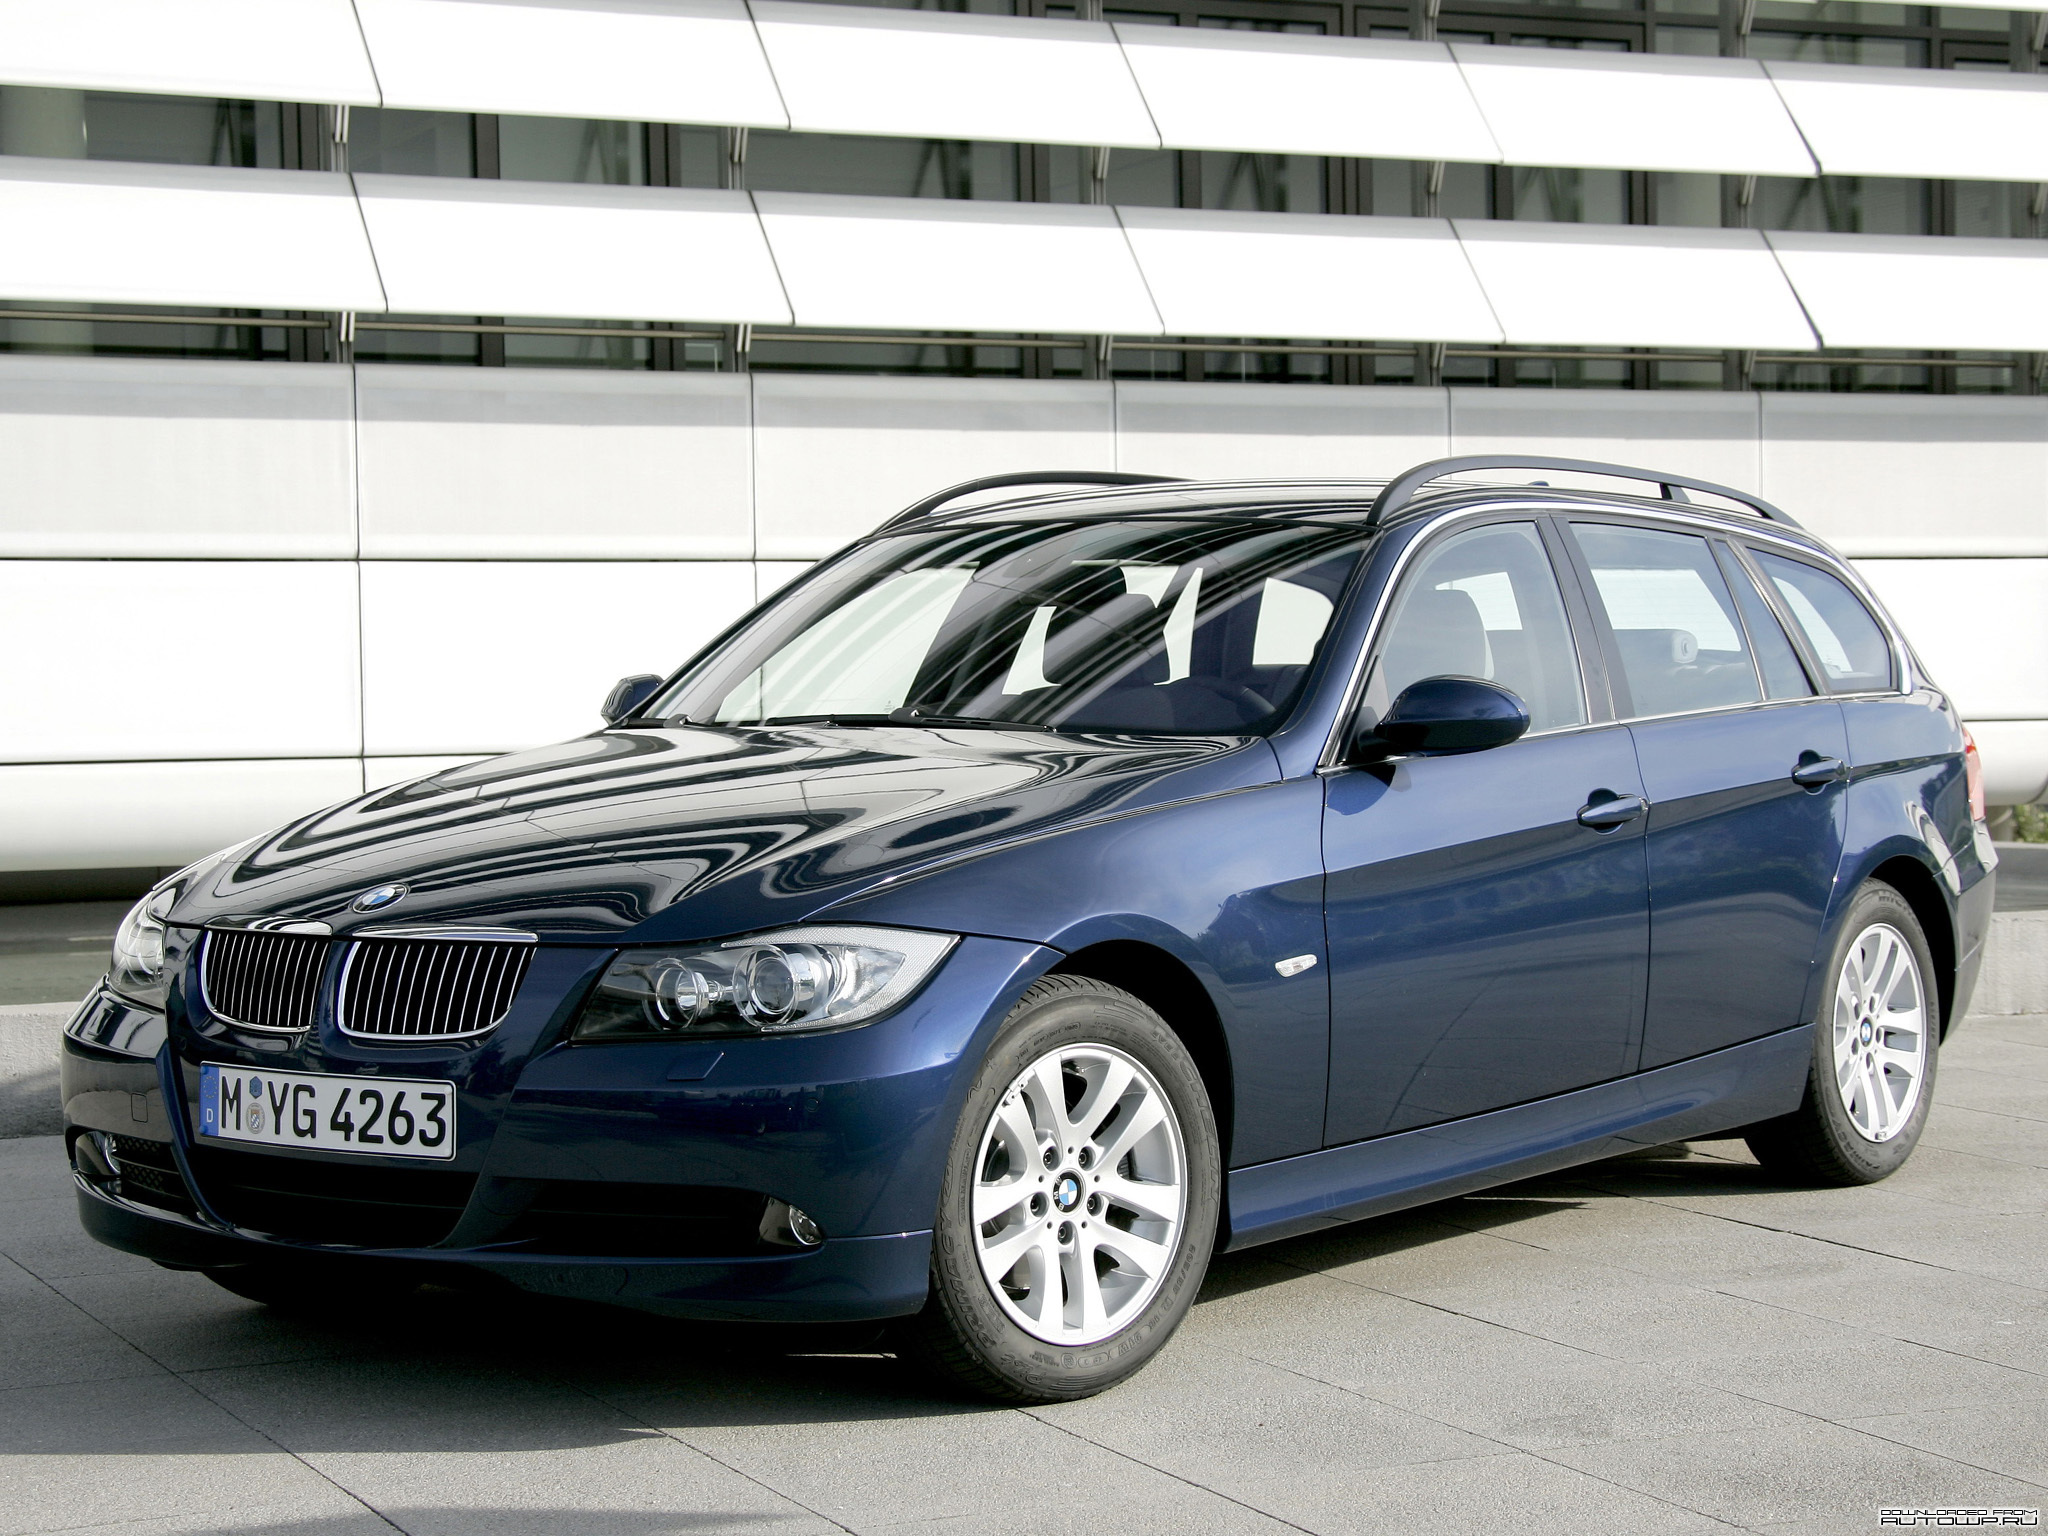 BMW 3series E91 Touring photos PhotoGallery with 61